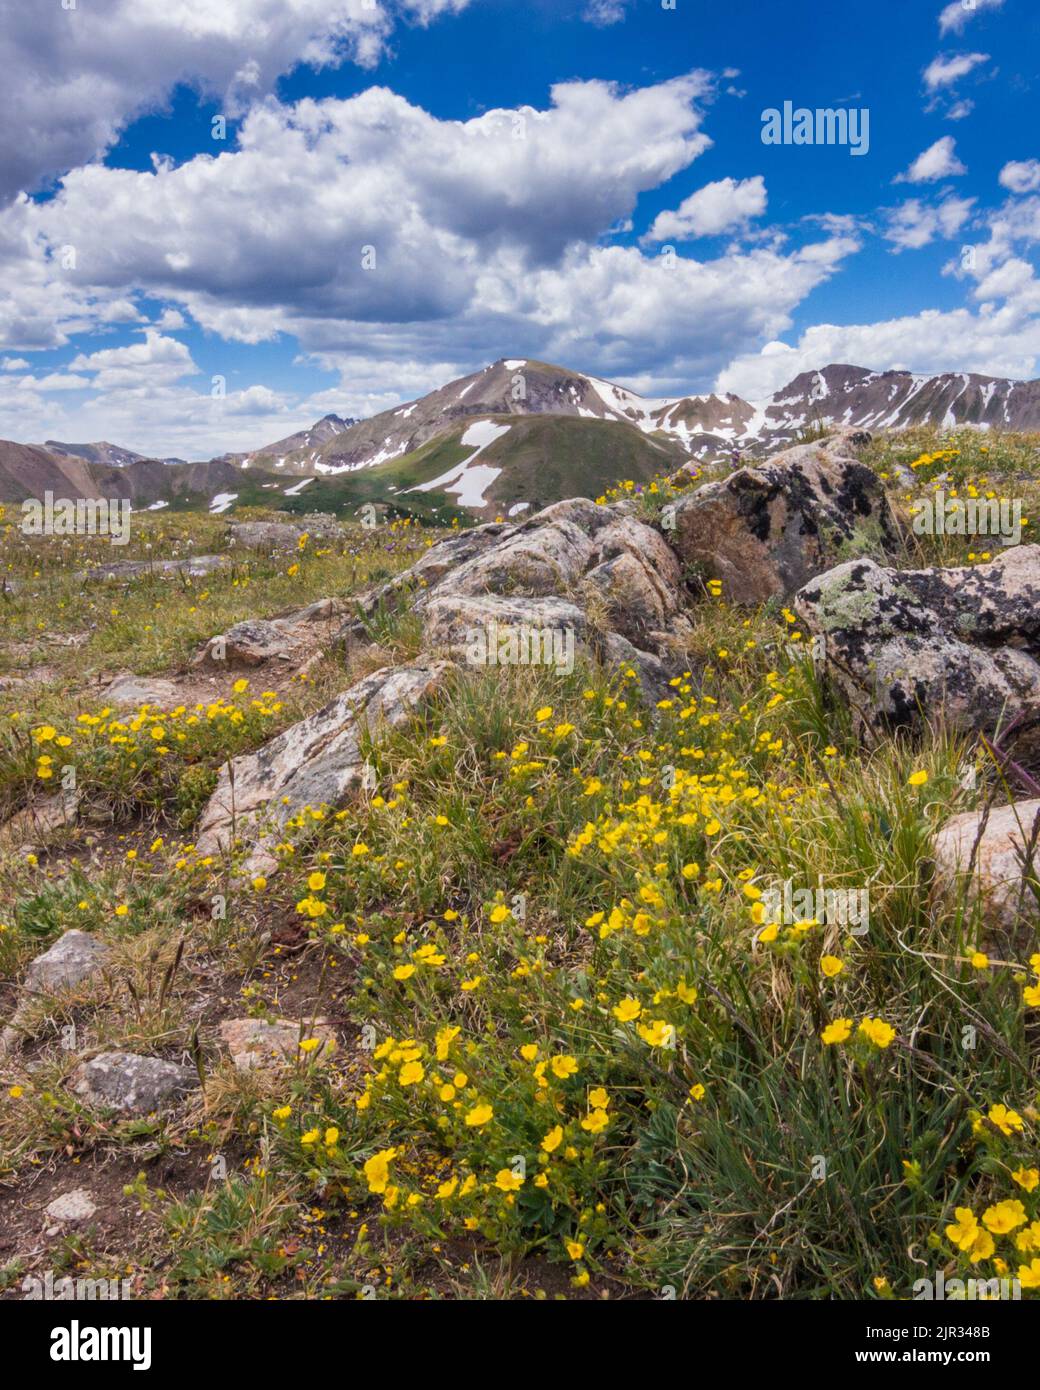 Tiny yellow wildflowers flourish amidst the granite boulders of Independence Pass in the Colorado Rockies Stock Photo